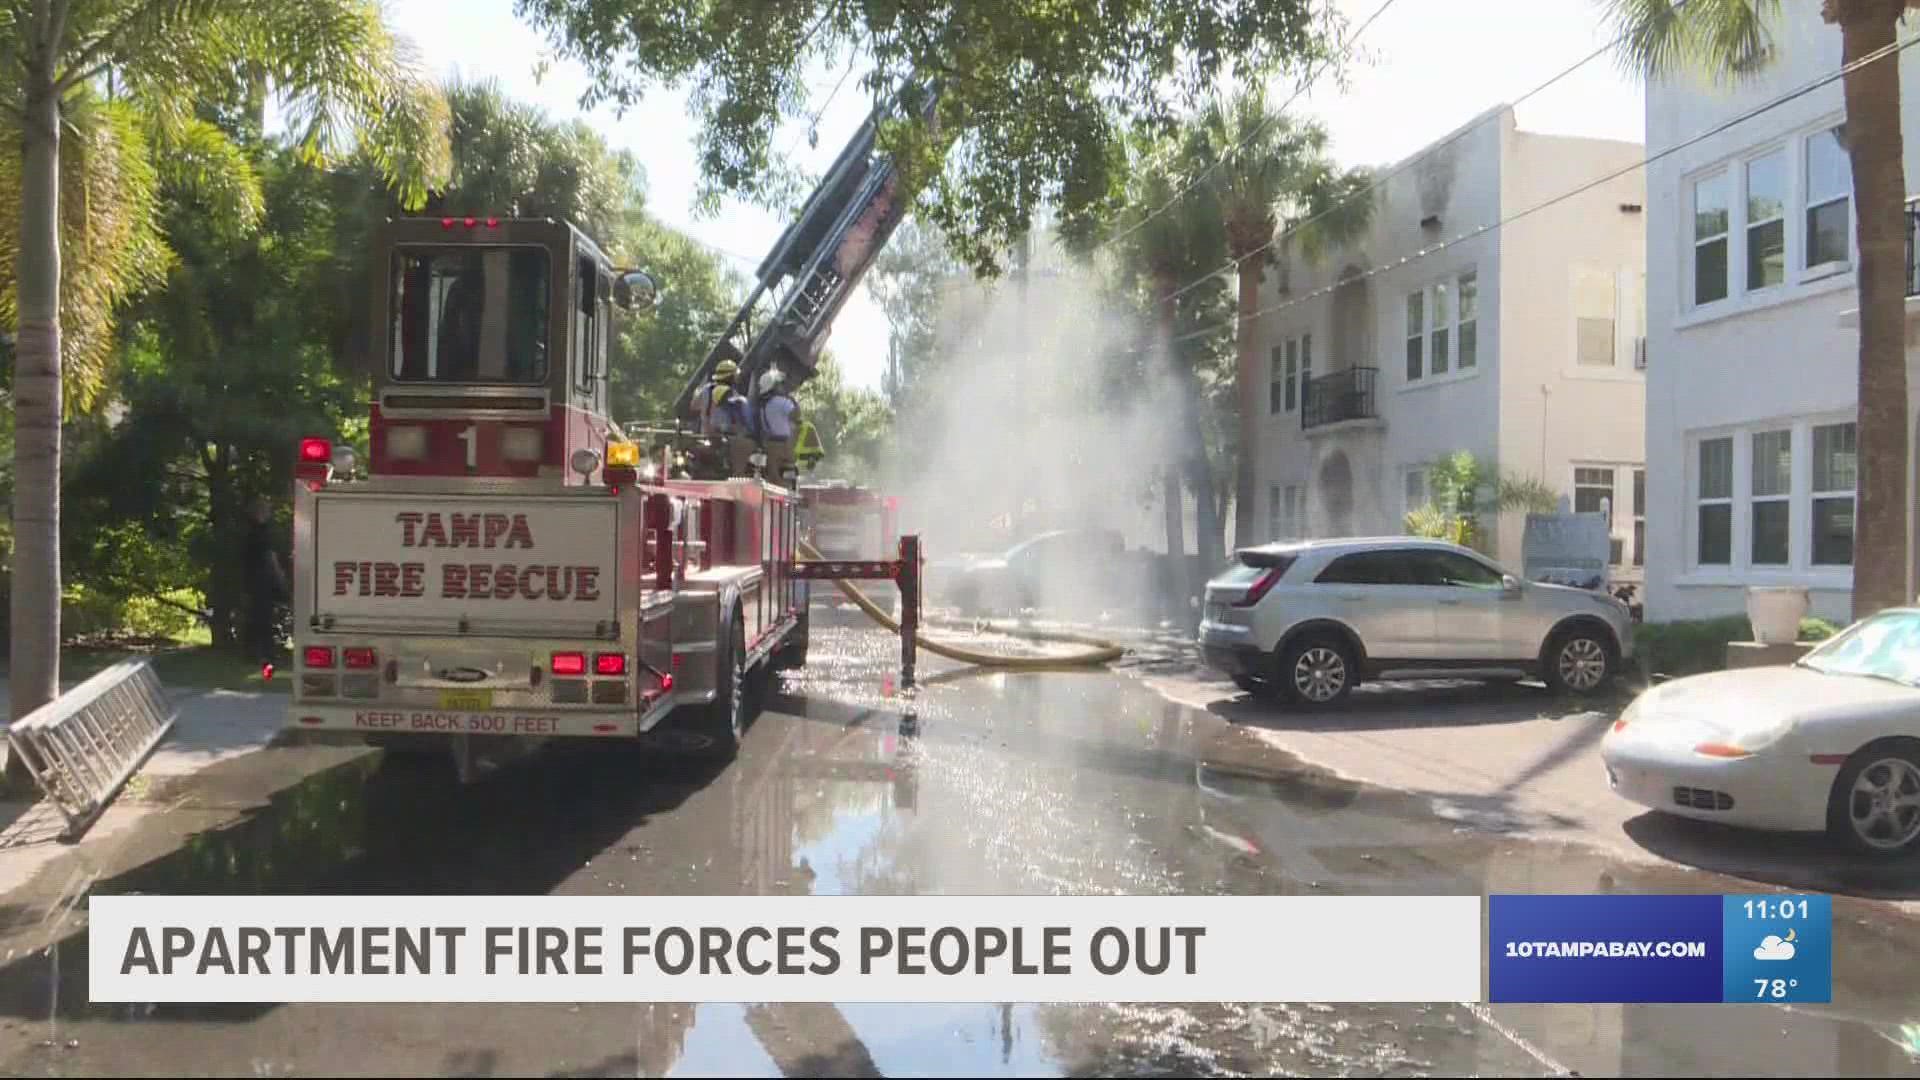 Flames and smoke were seen coming out from the roof.